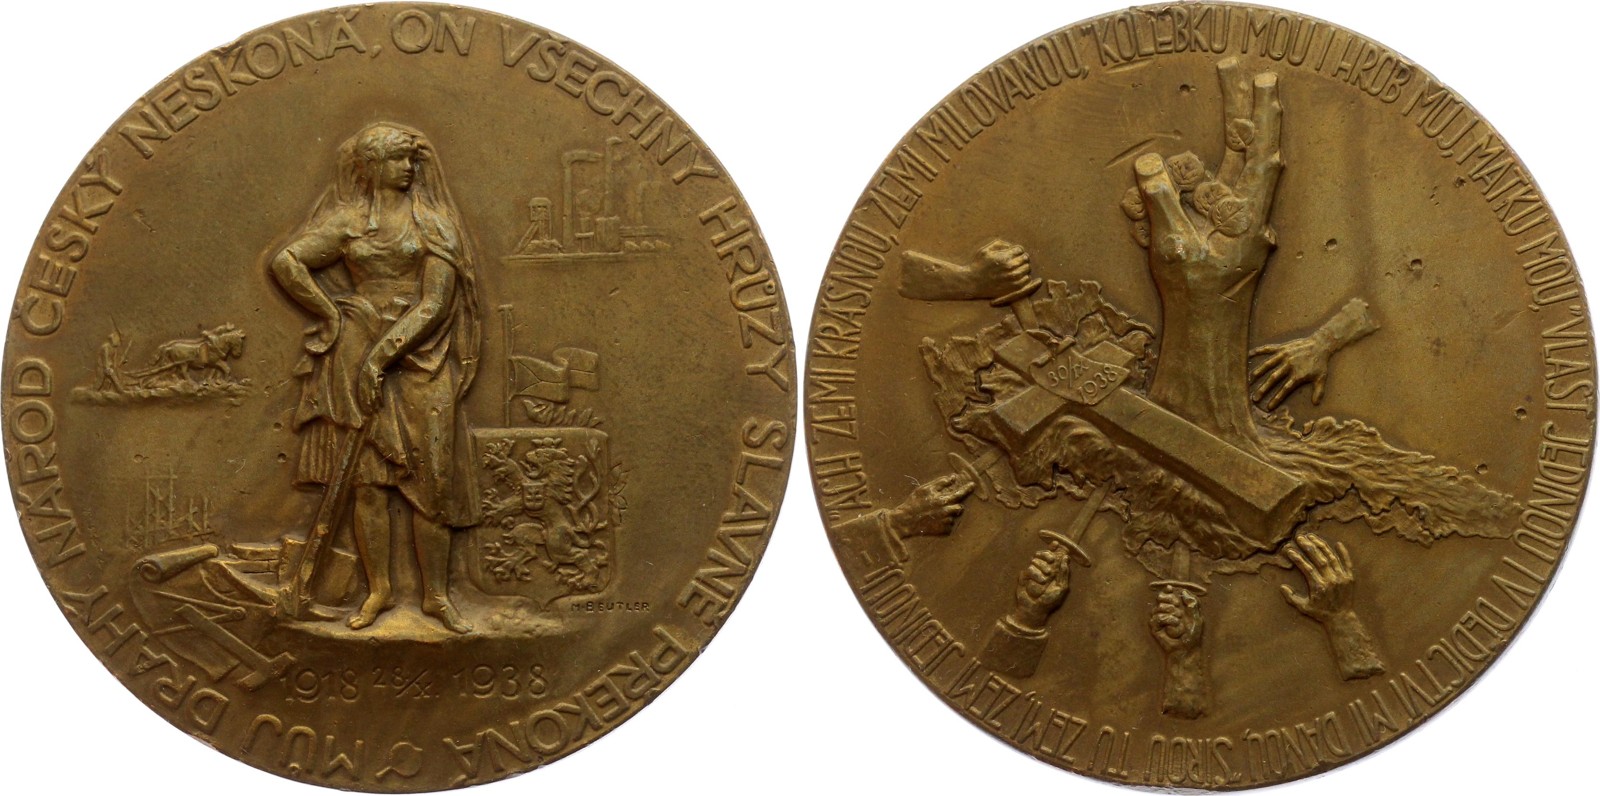 Czechoslovakia  Liberation Medal "My Dear Czech Nation, Famous for Overcoming All the Horrors" 1938